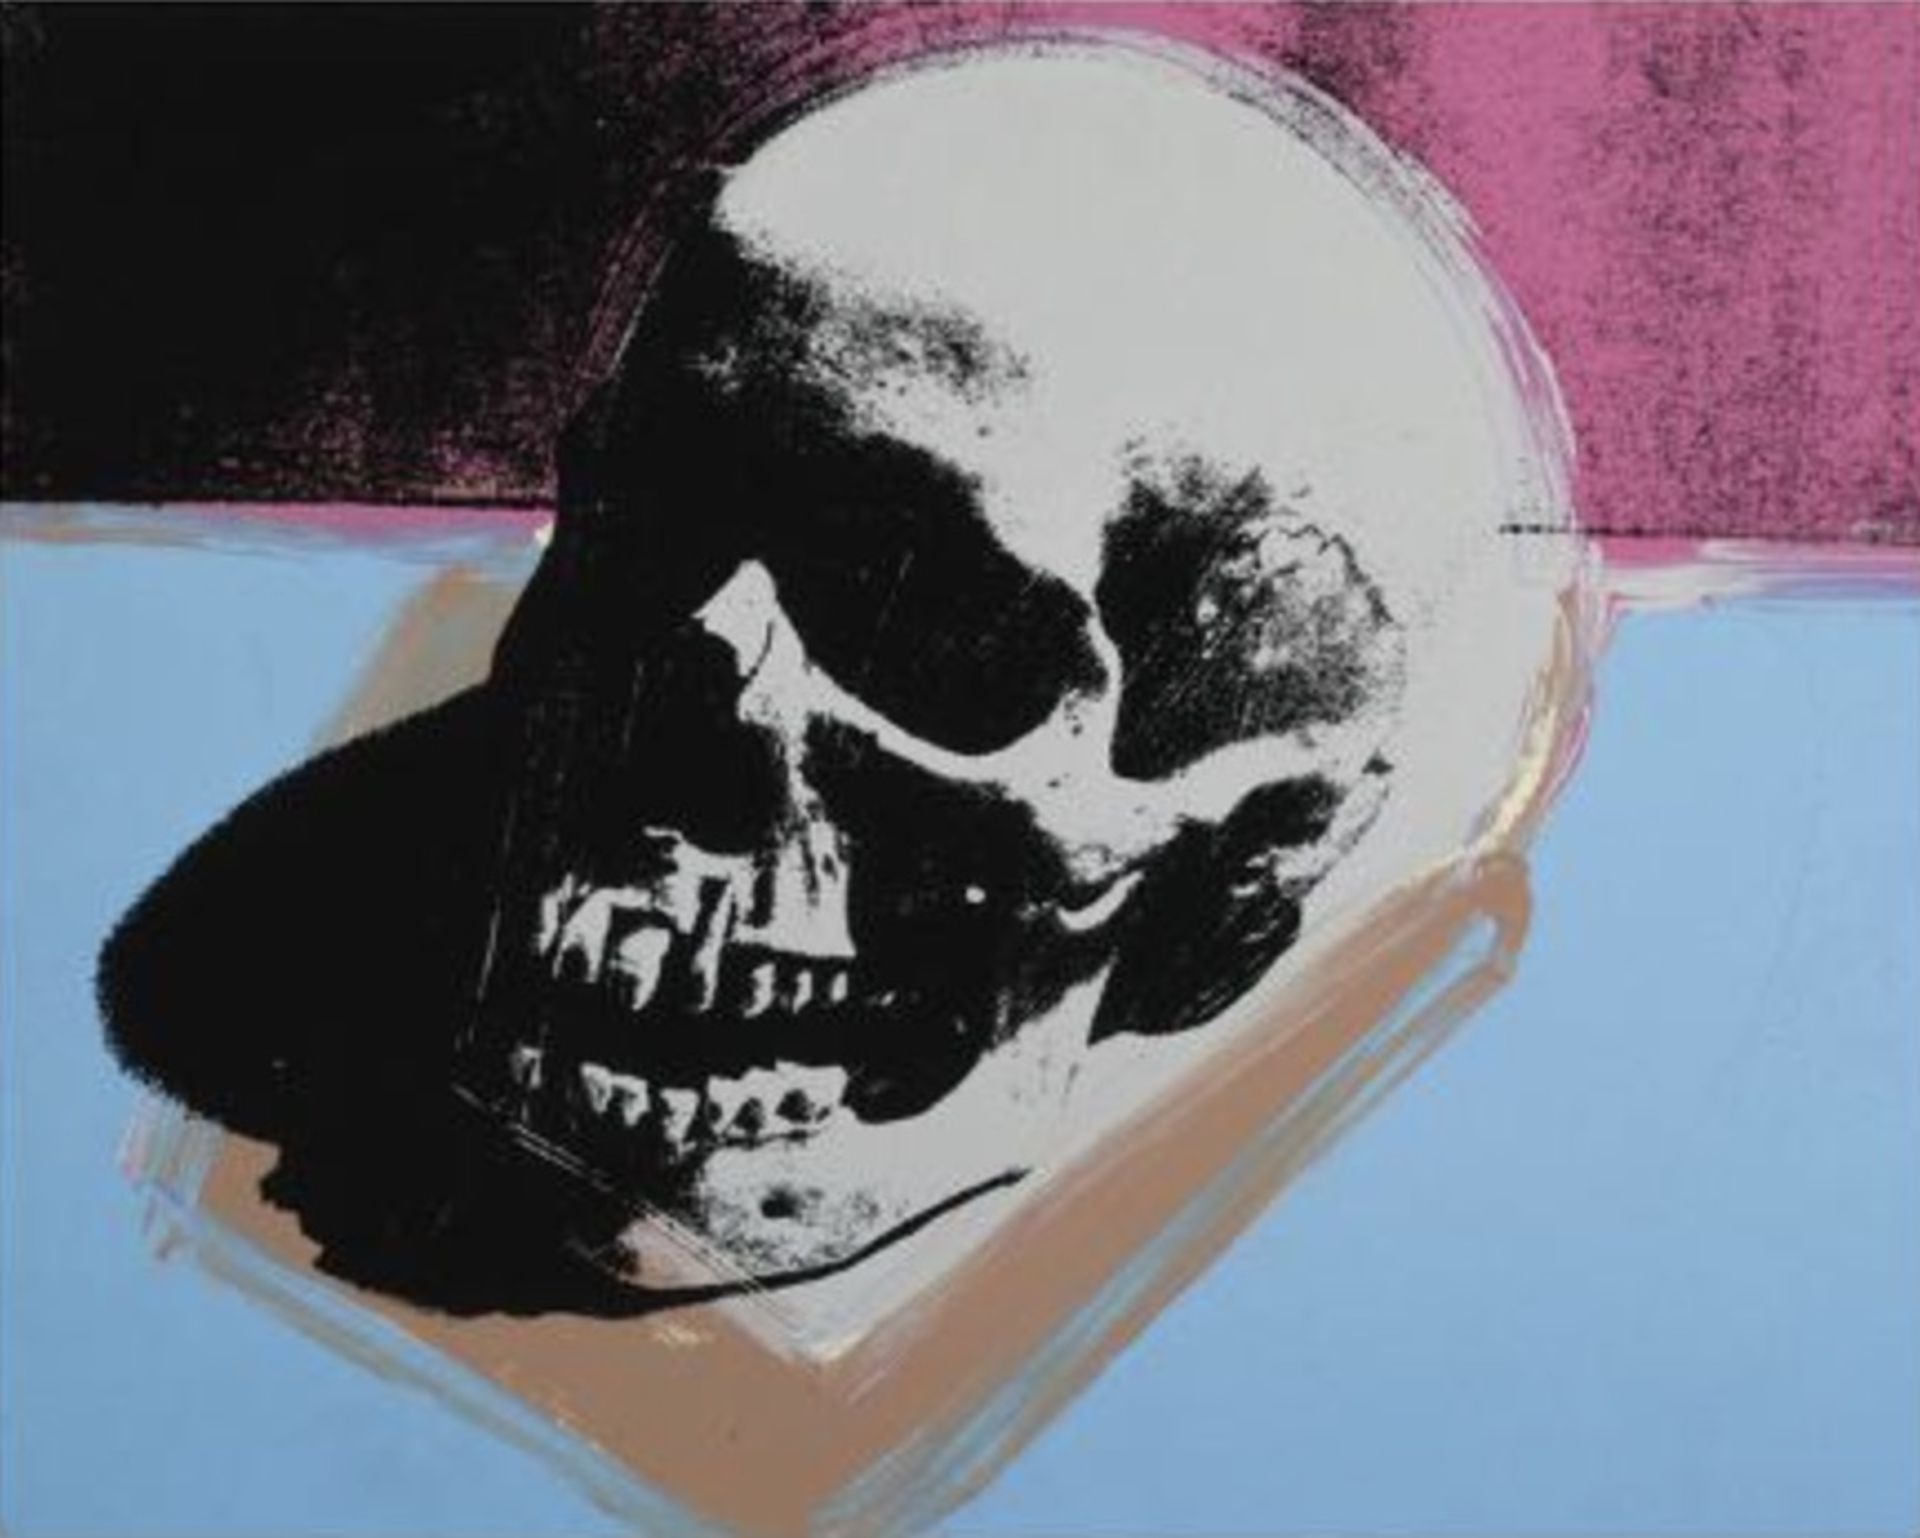 Andy Warhol "Skull, 1976" Offset Lithograph